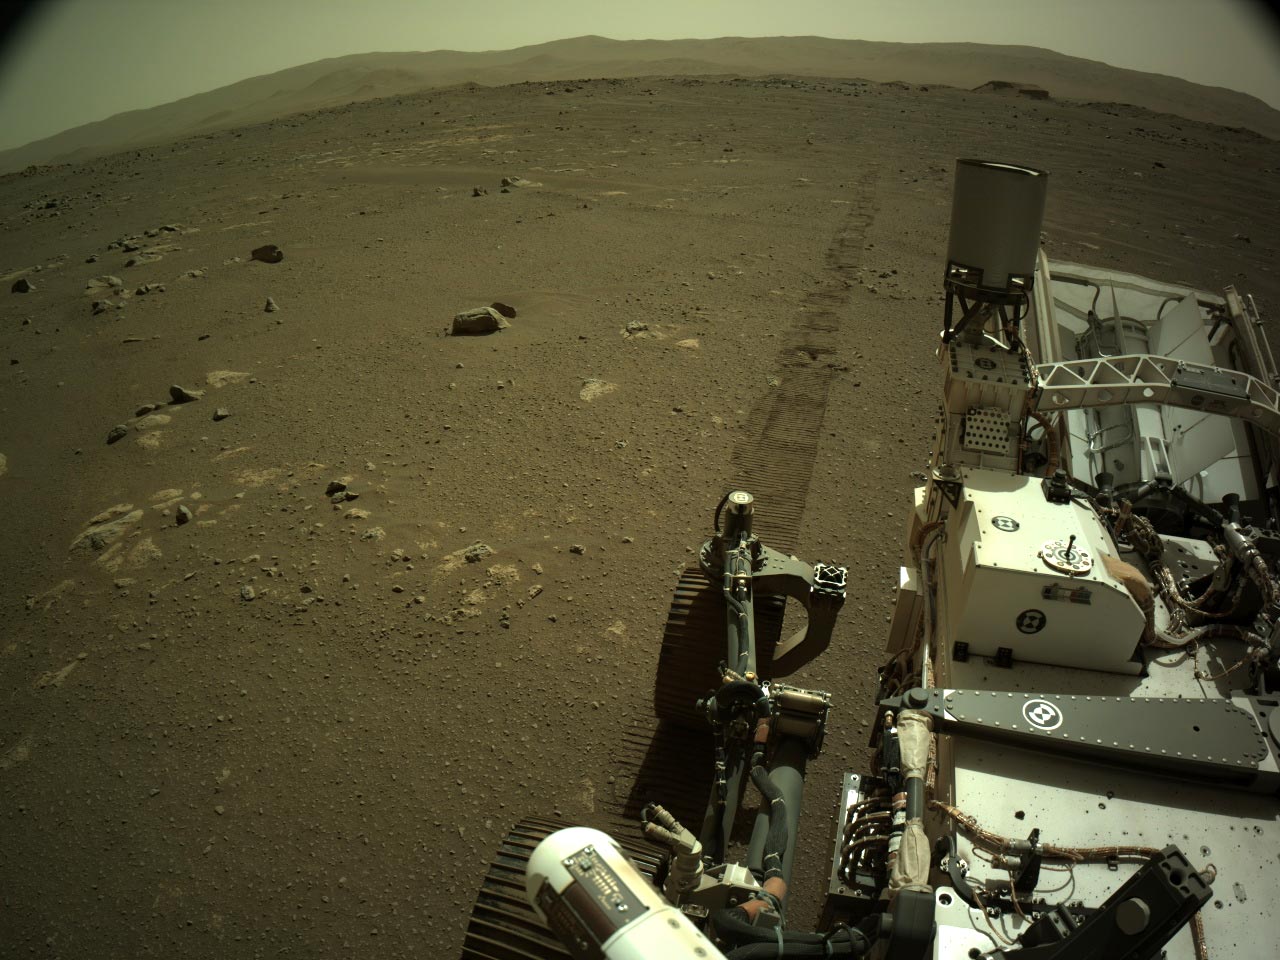 Hear the cracked surface of the Red Planet – Perseverance Rover captures the sounds of driving on Mars